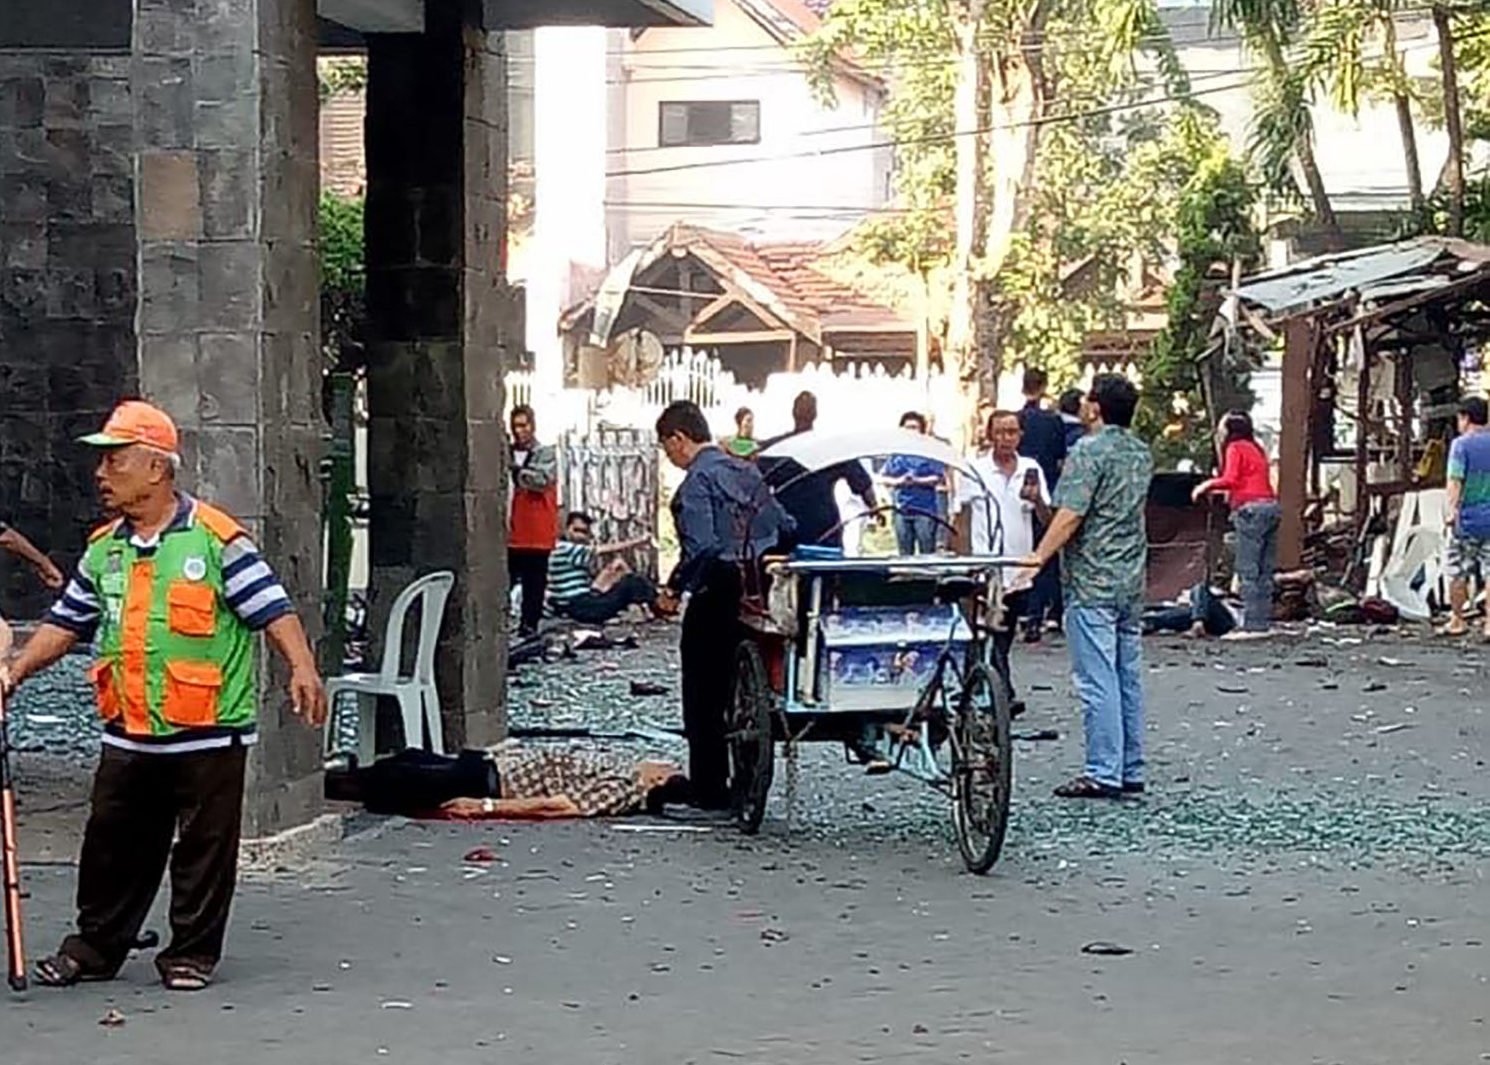 Bystanders observe the aftermath of a suicide bombing at a church in Surabaya, Indonesia on May 13, 2018. PHOTO: TheDCNF